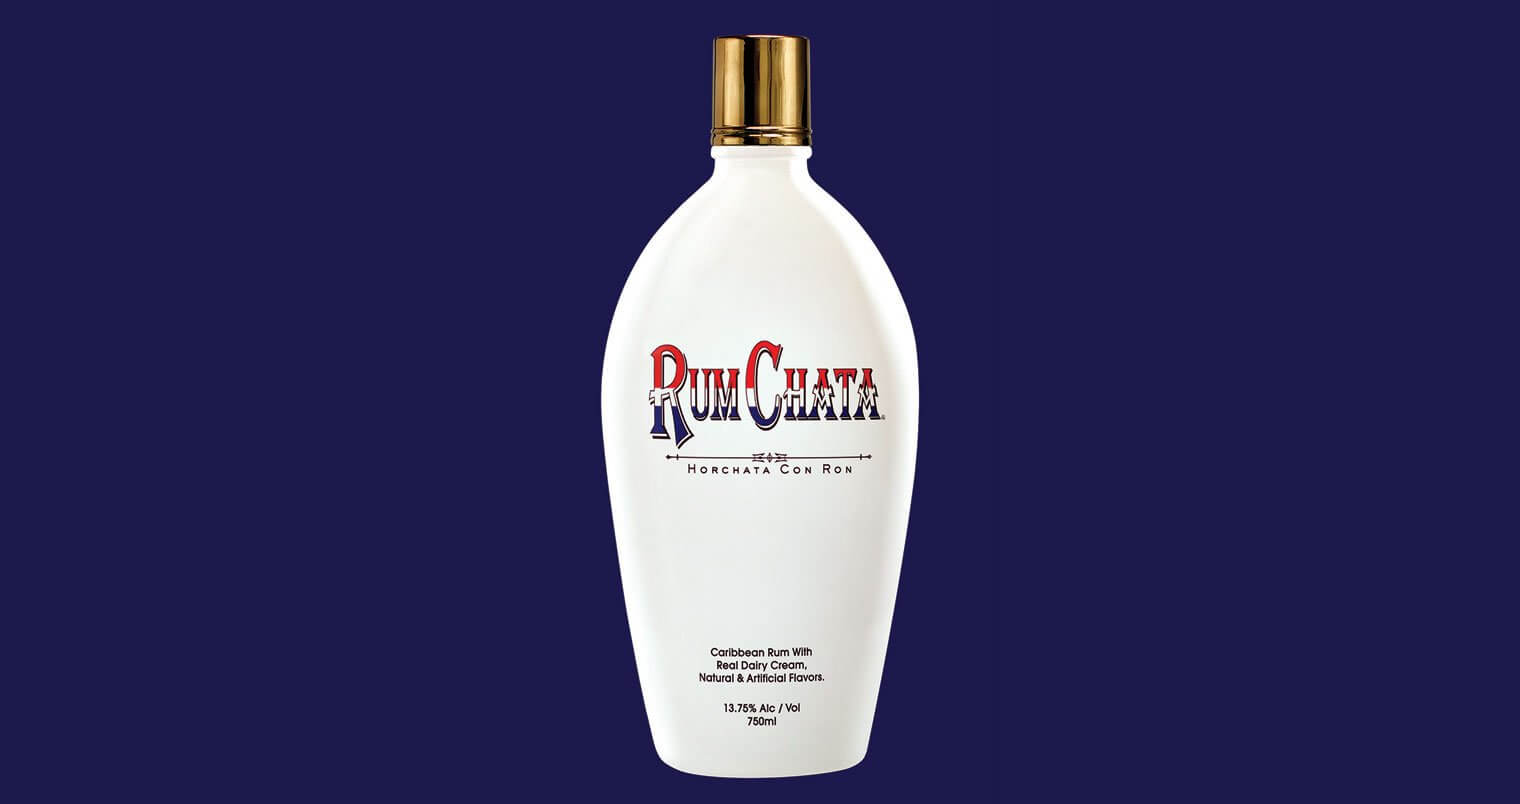 RumChata Freedom Bottle Helps Expand Lone Survivor Foundation Programs, featured image